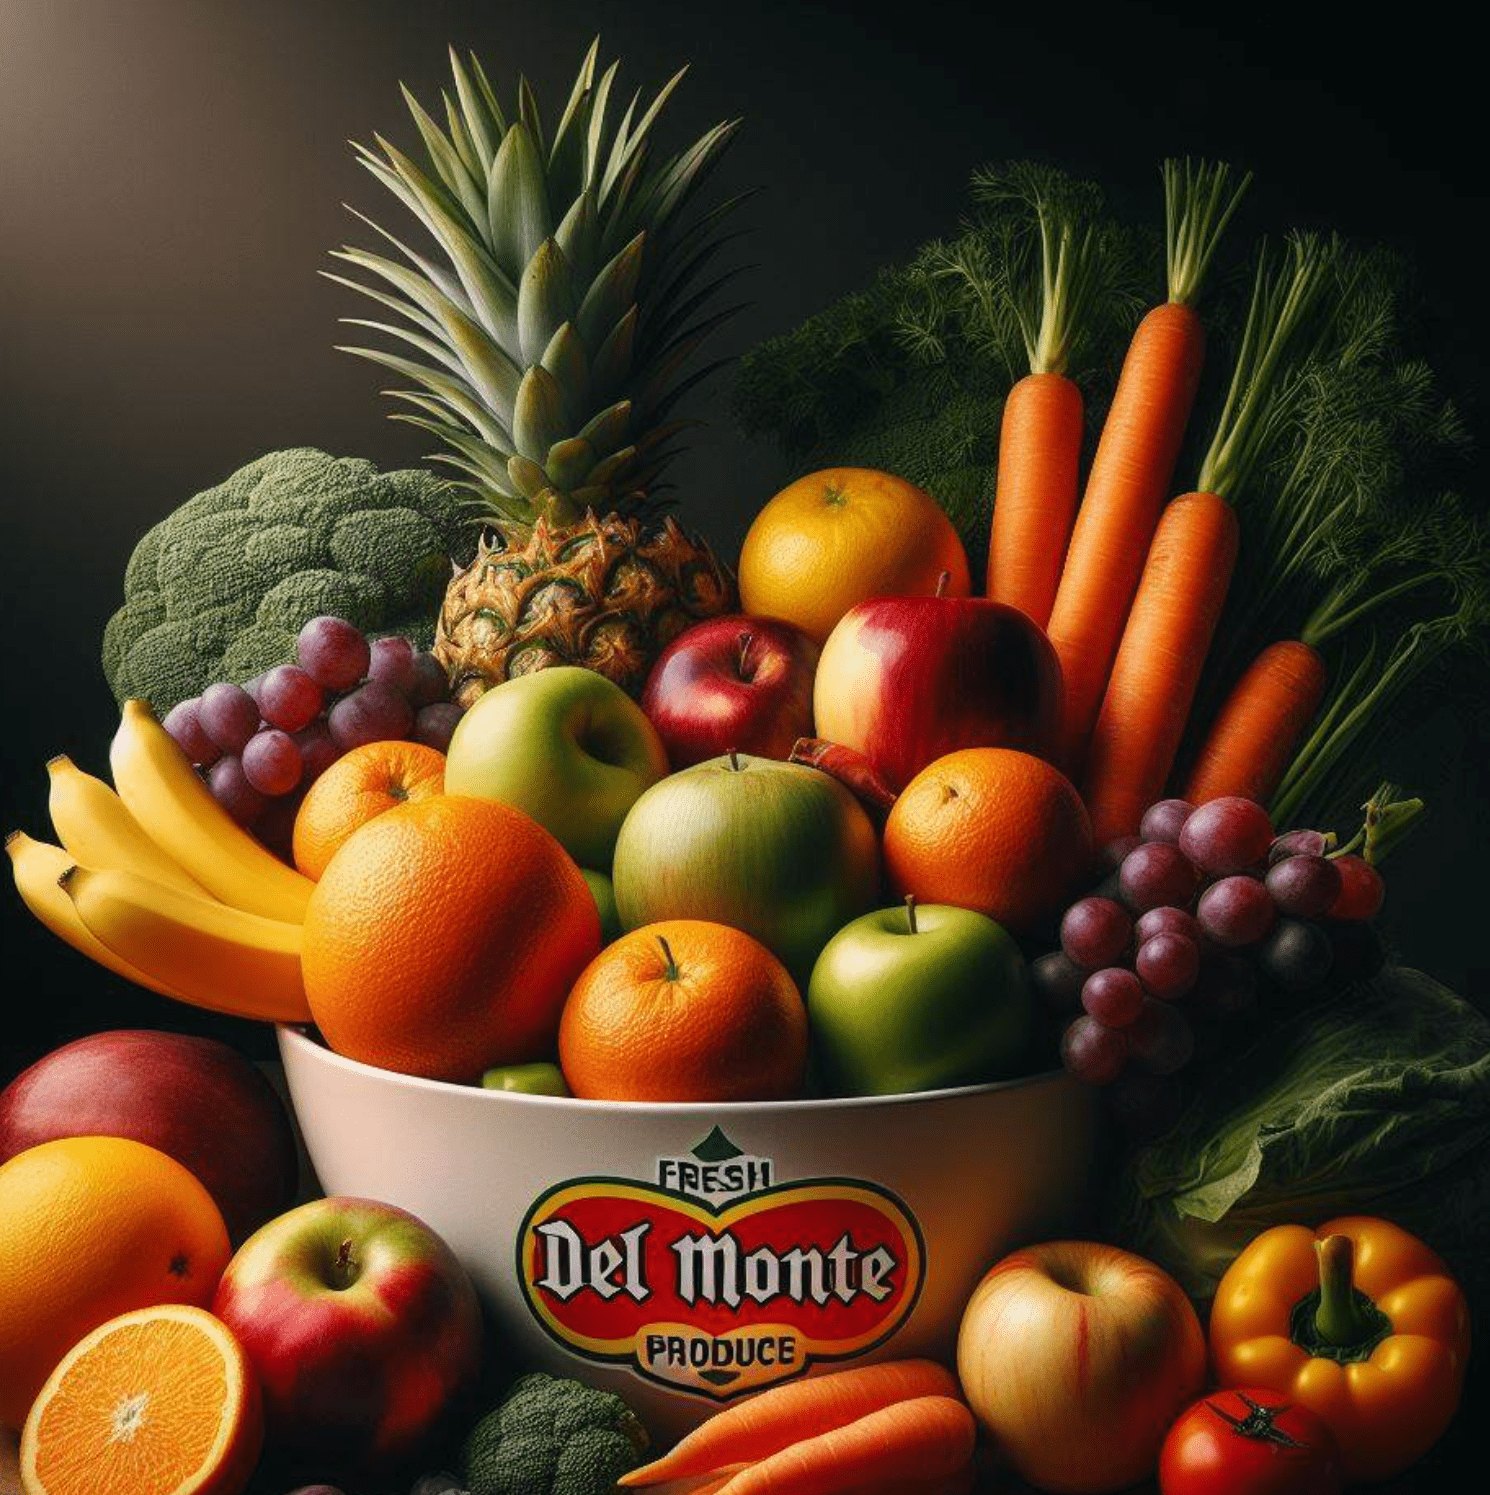 Fresh Del Monte Produce and fruits